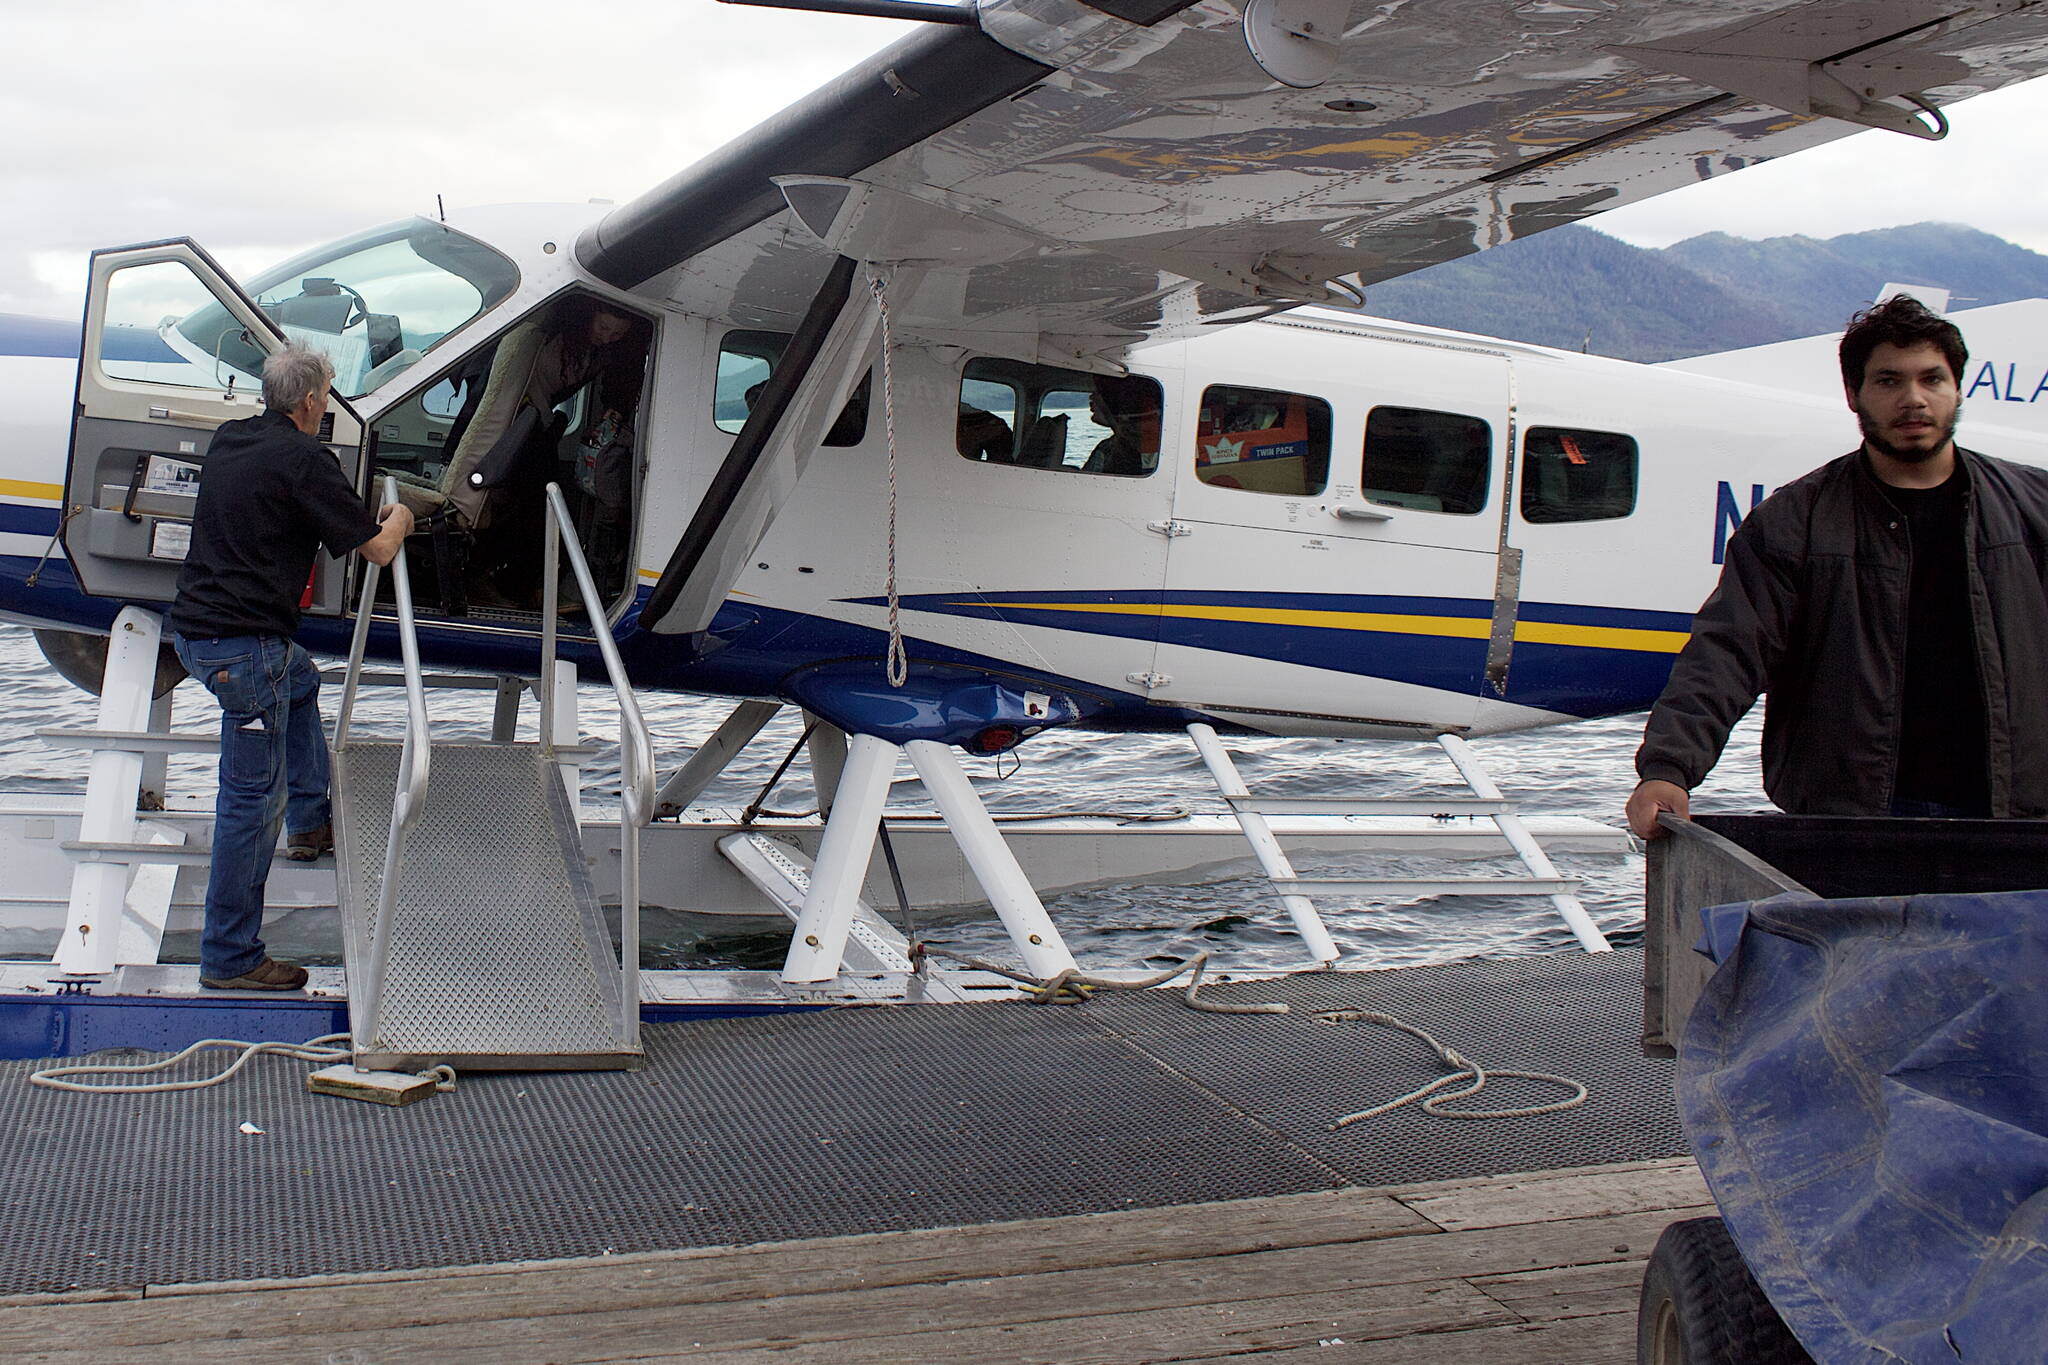 Jerusalem Chase, 22, right, manager at the Alaska Seaplanes terminal in Tenakee Springs, hauls cargo from an arriving flight Sunday night to the ATV he uses to deliver items to passengers. Traditional road vehicles are banned in Tenakee except for a couple of public service trucks, but ATVs are increasingly in use.